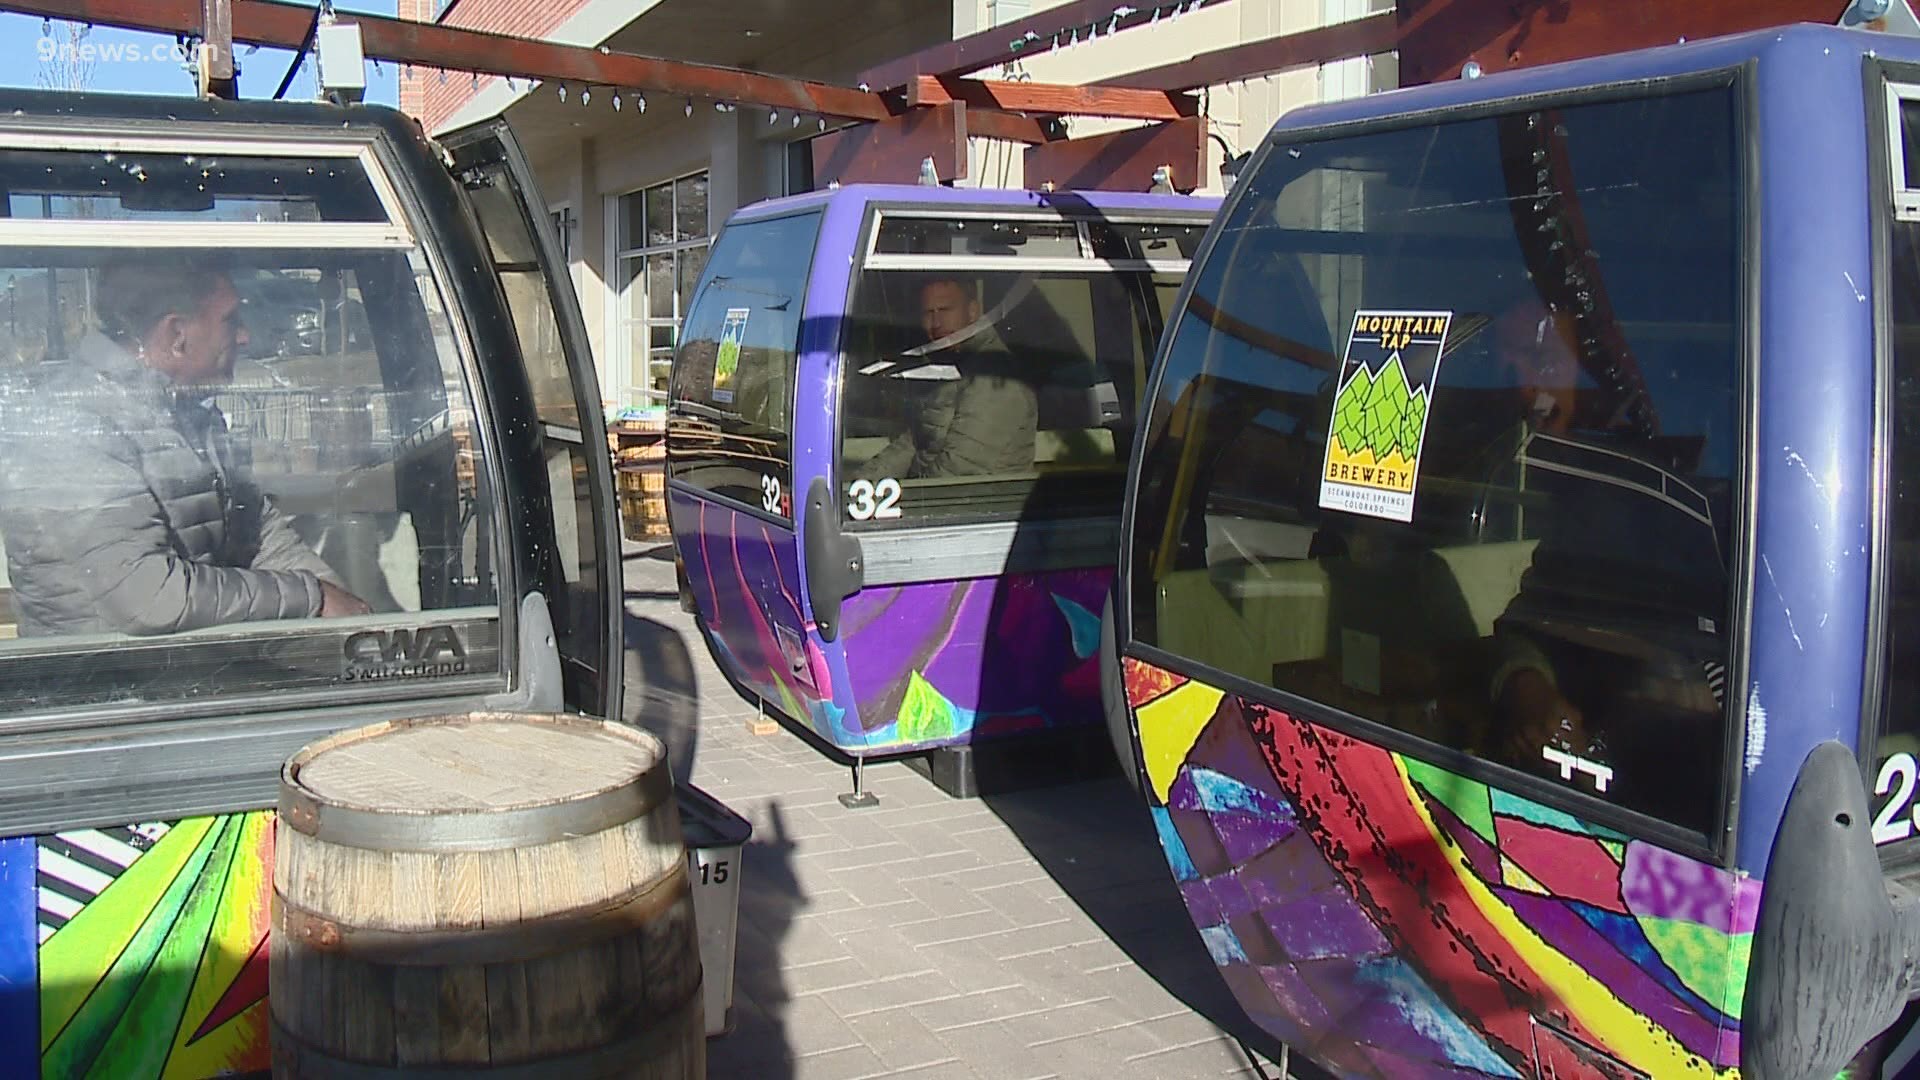 Mountain Tap Brewery in Steamboat Springs is using heated gondolas to seat single household groups outside, giving their business a lift during COVID restrictions.